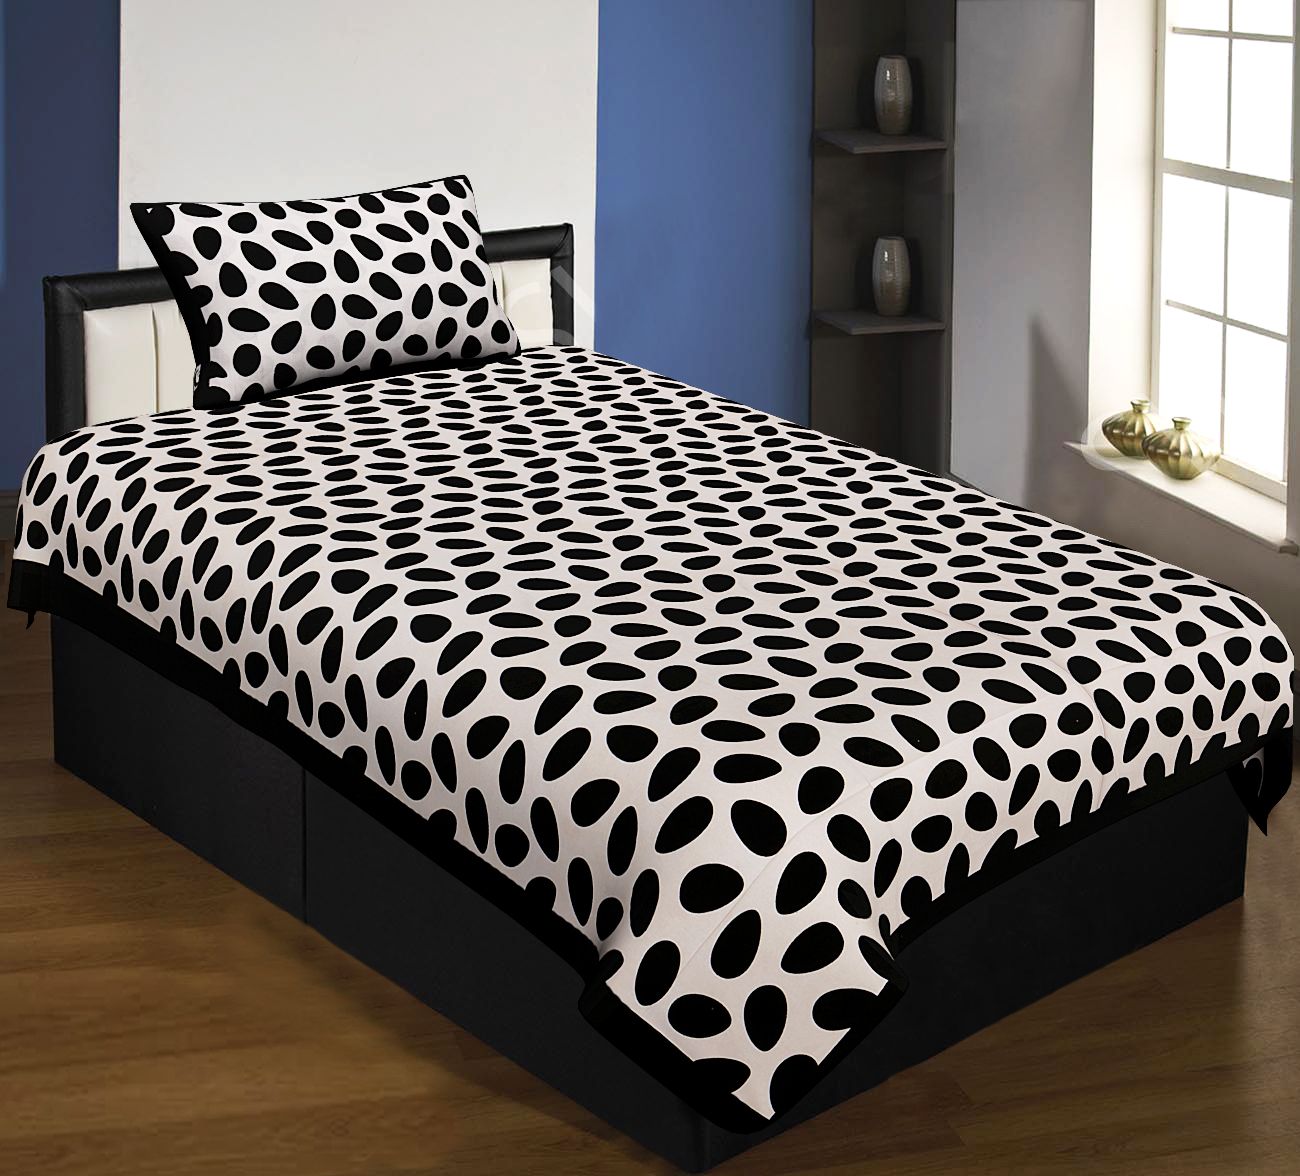 Black Border White Base Cow Print Cotton Single Bed Sheet with Pillow cover